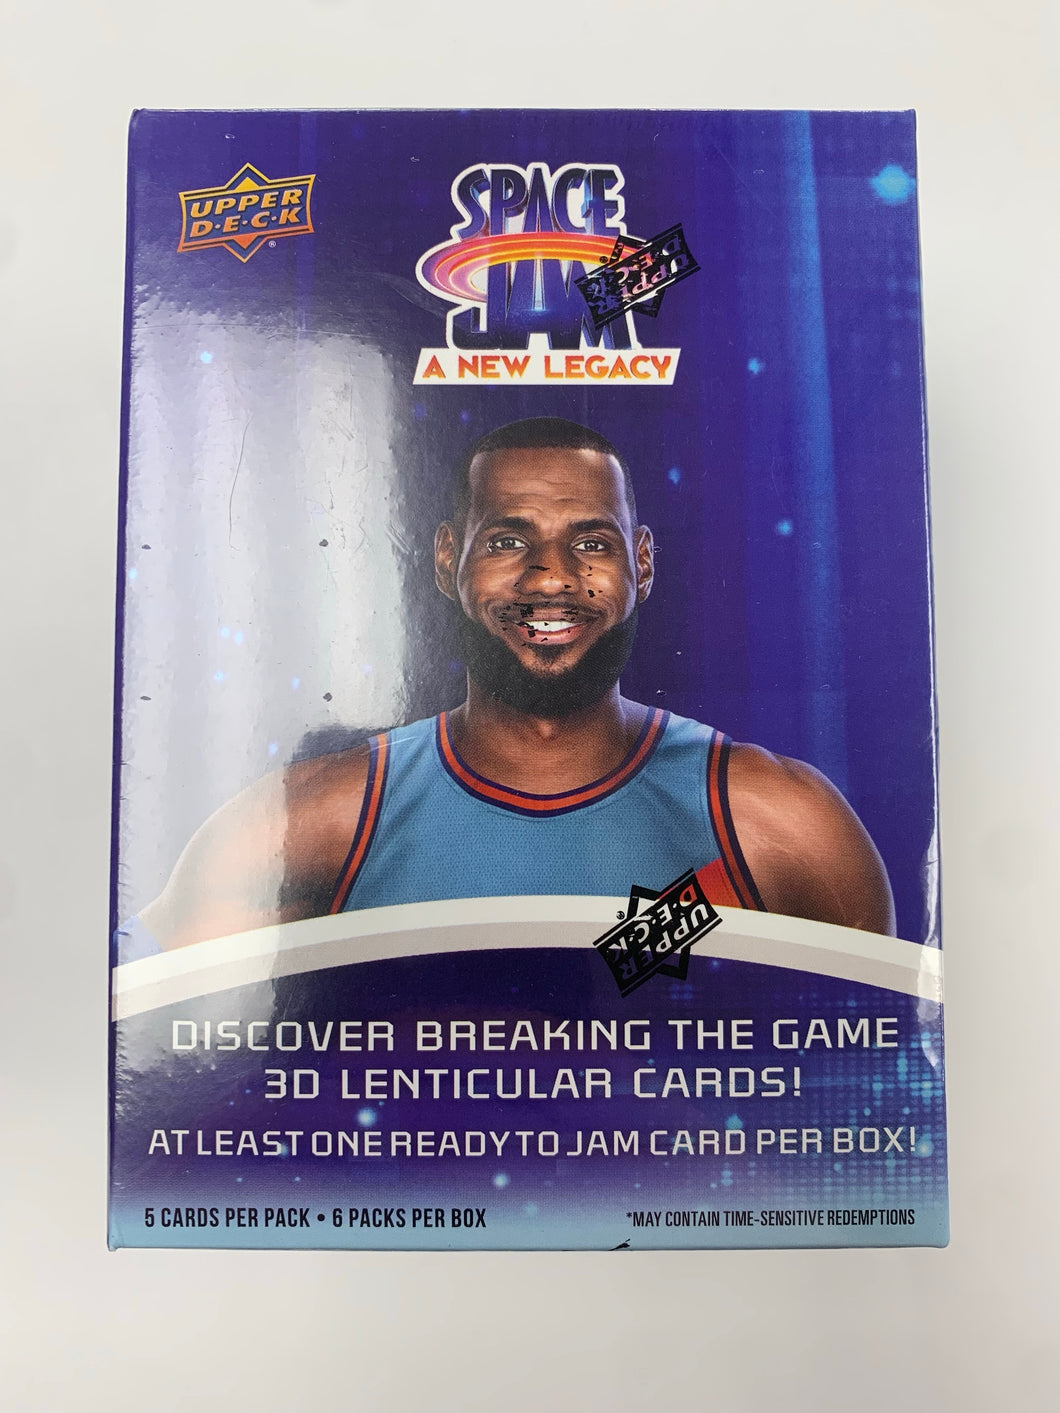 Upper Deck Space Jam A New Legacy Blaster